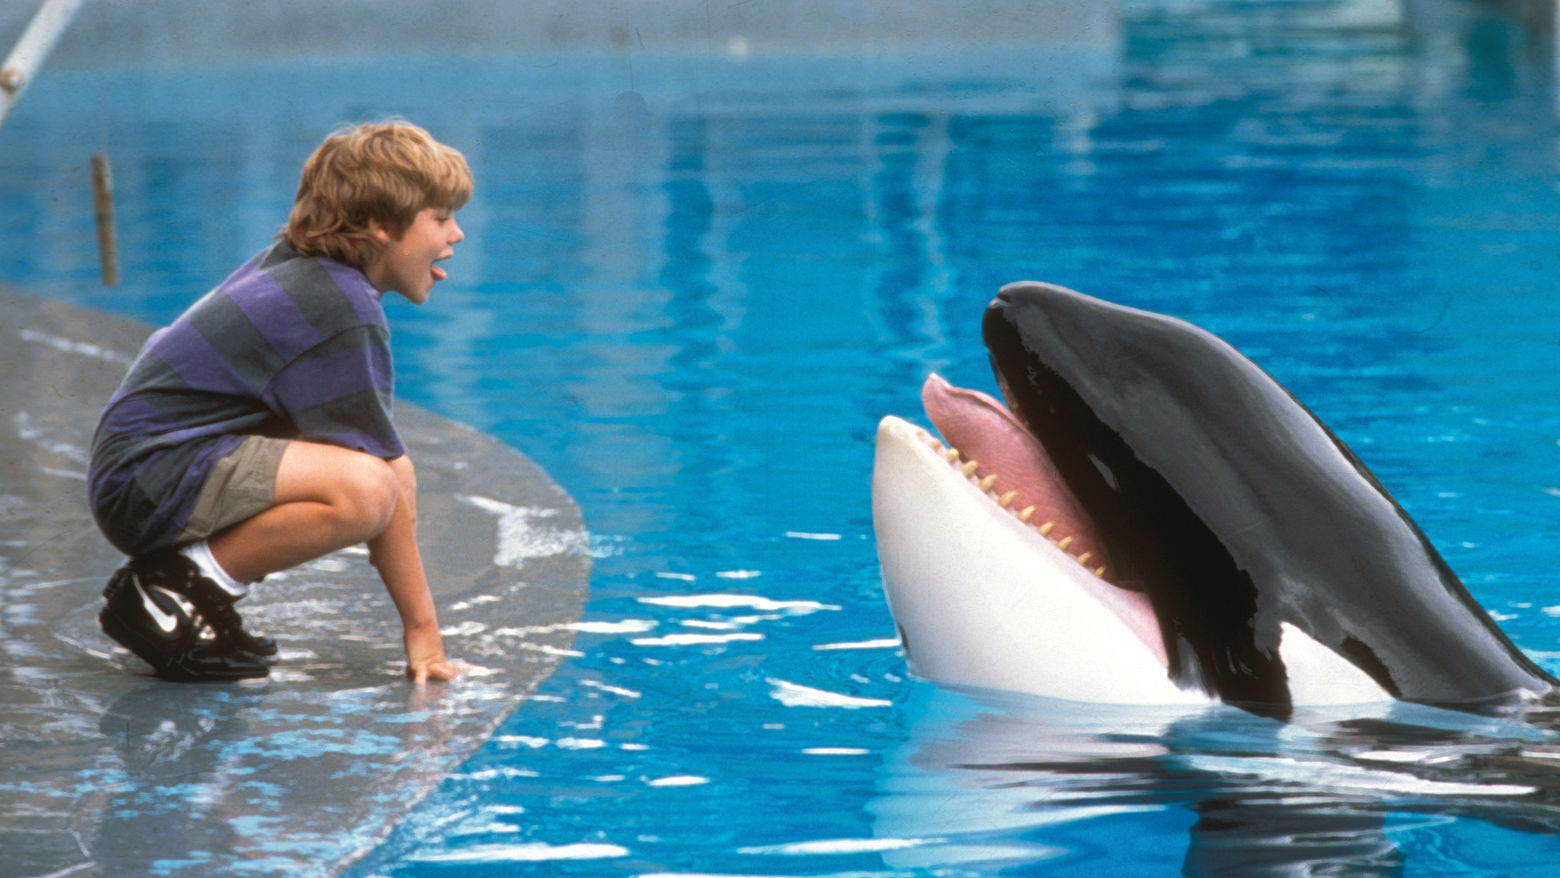 free willy 2 watch online